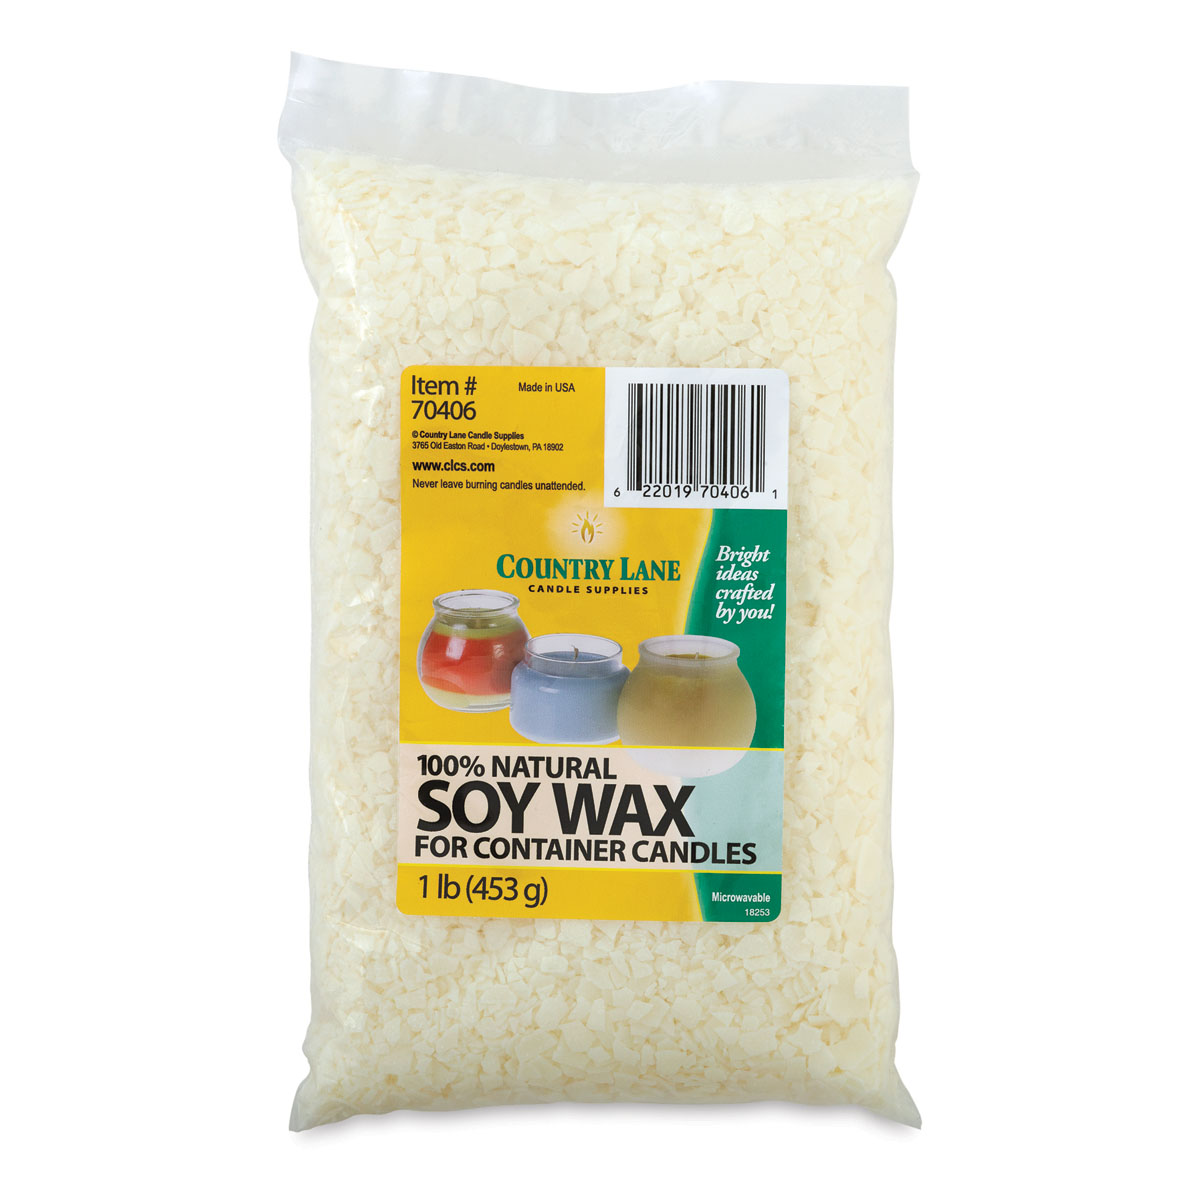 Country Lane Soy Wax